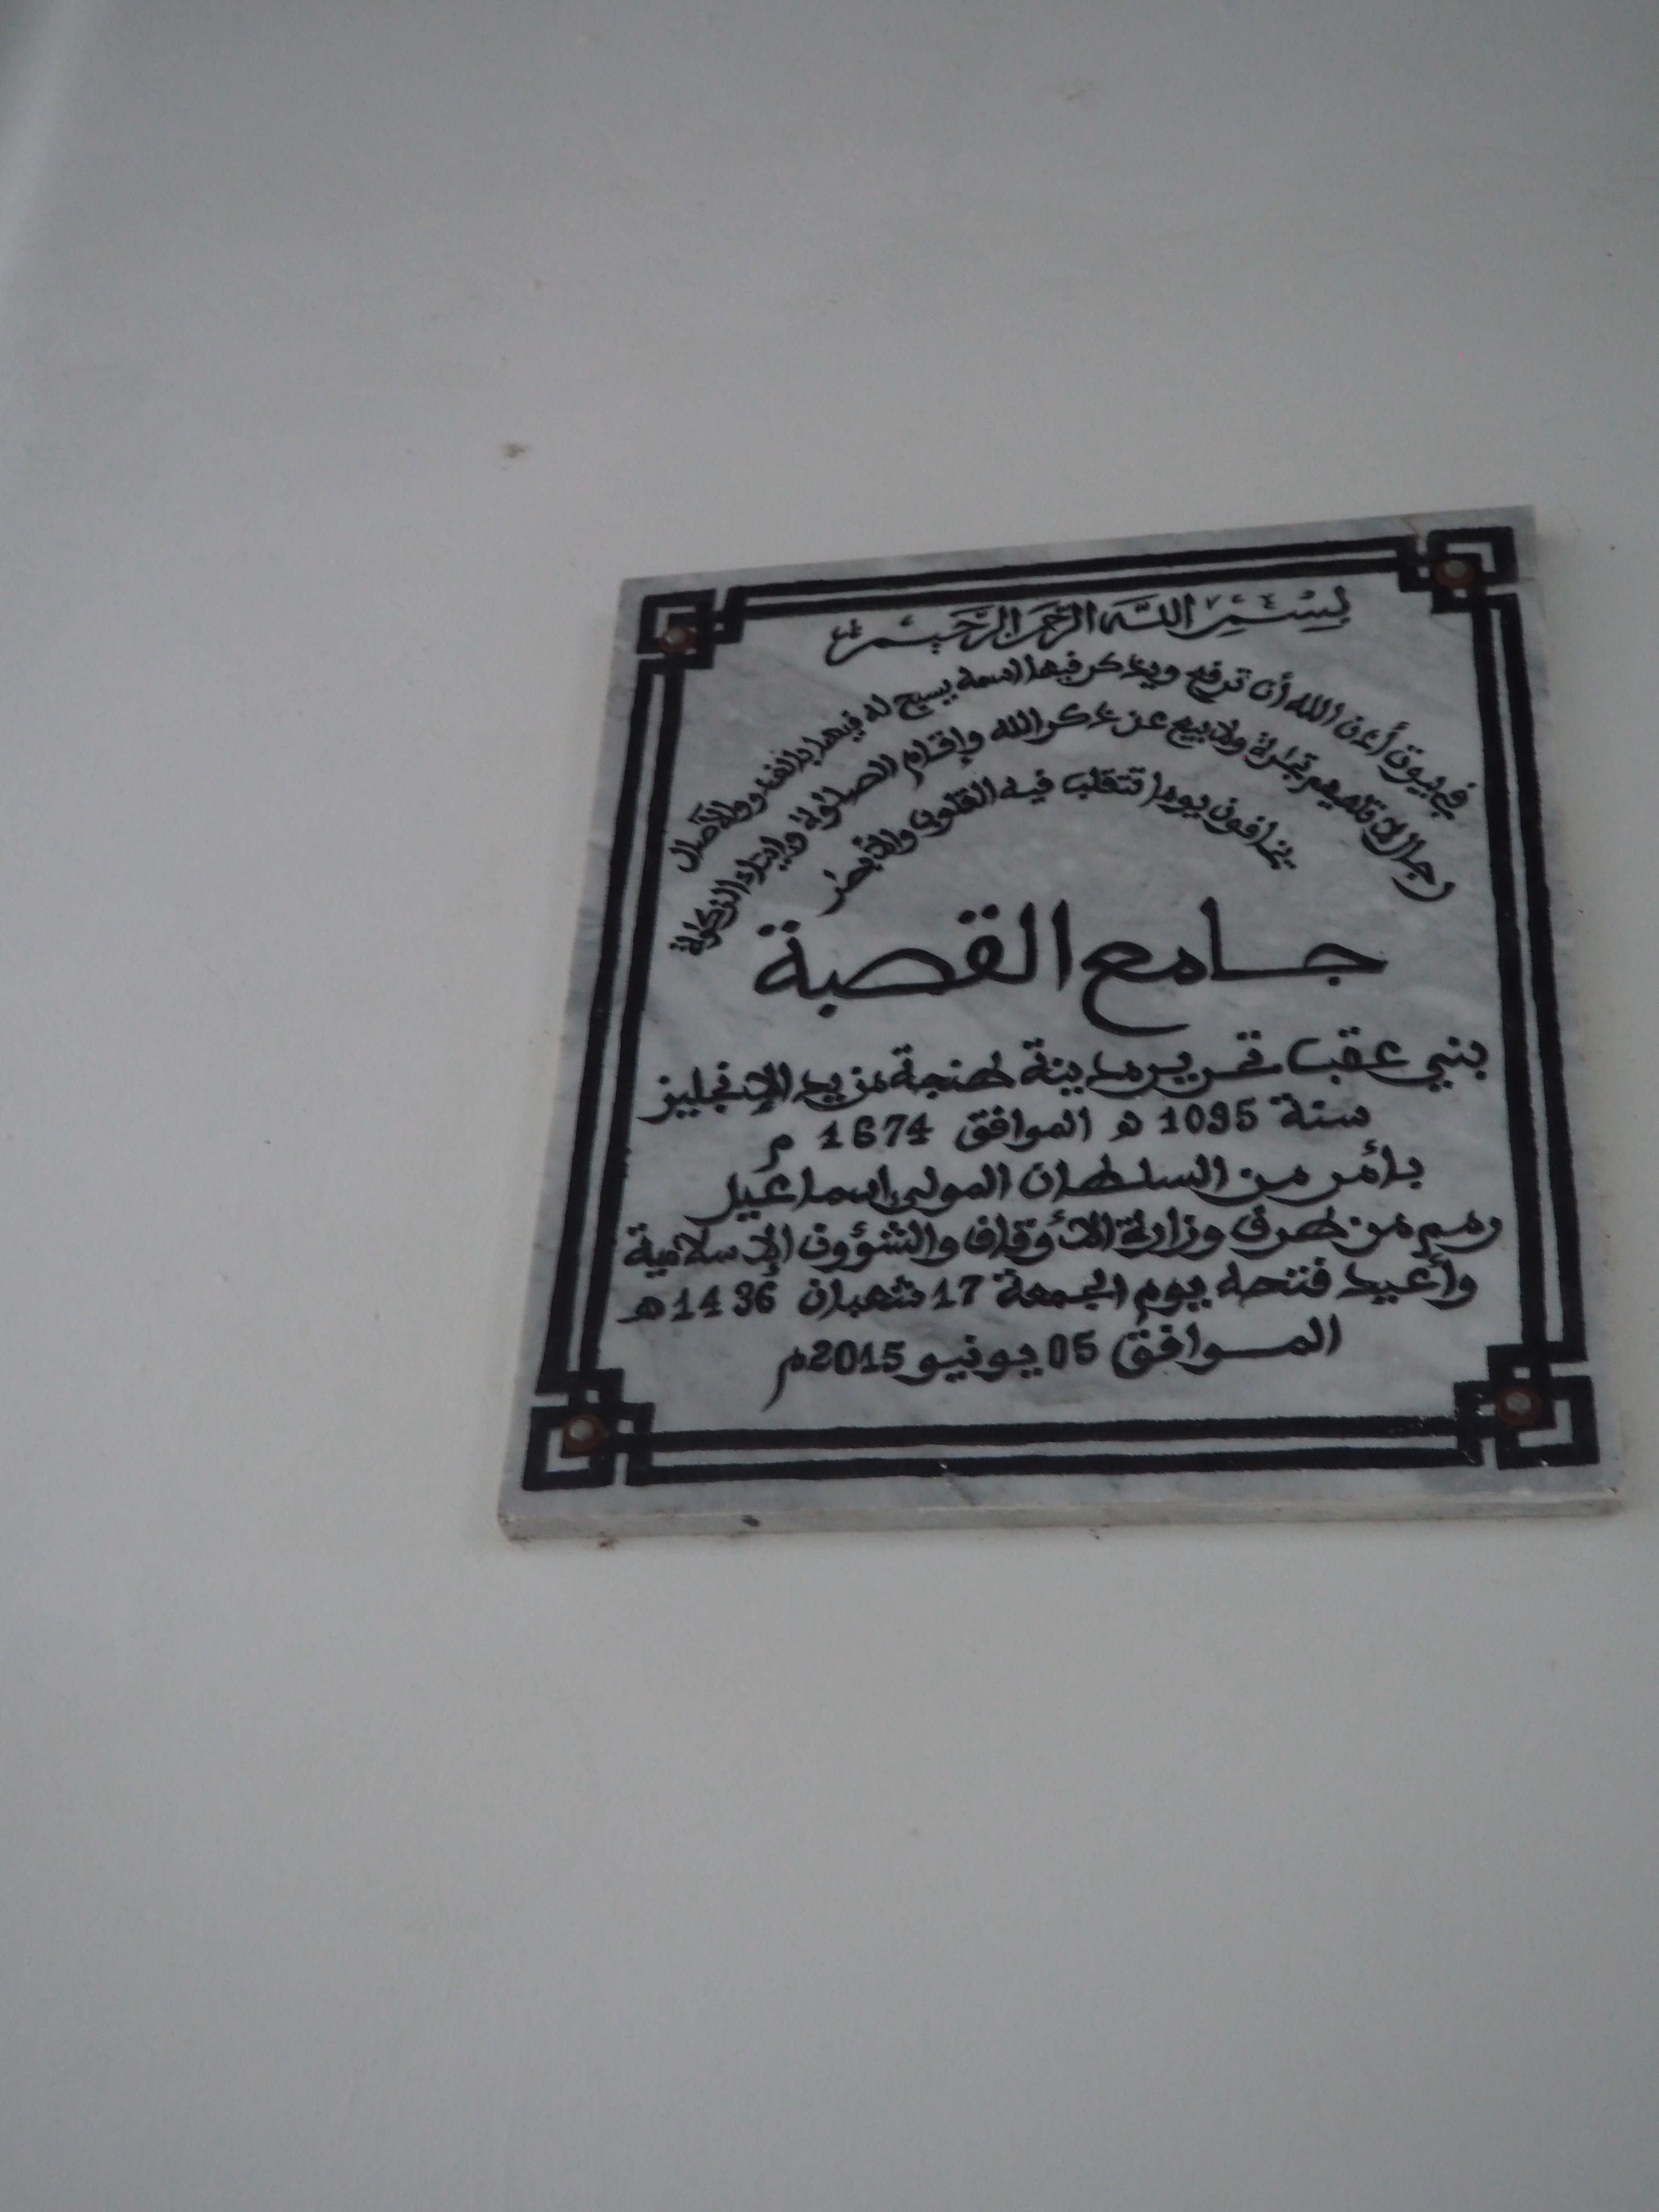 <p>Dedicatory plaque noting date of construction and renovation</p>